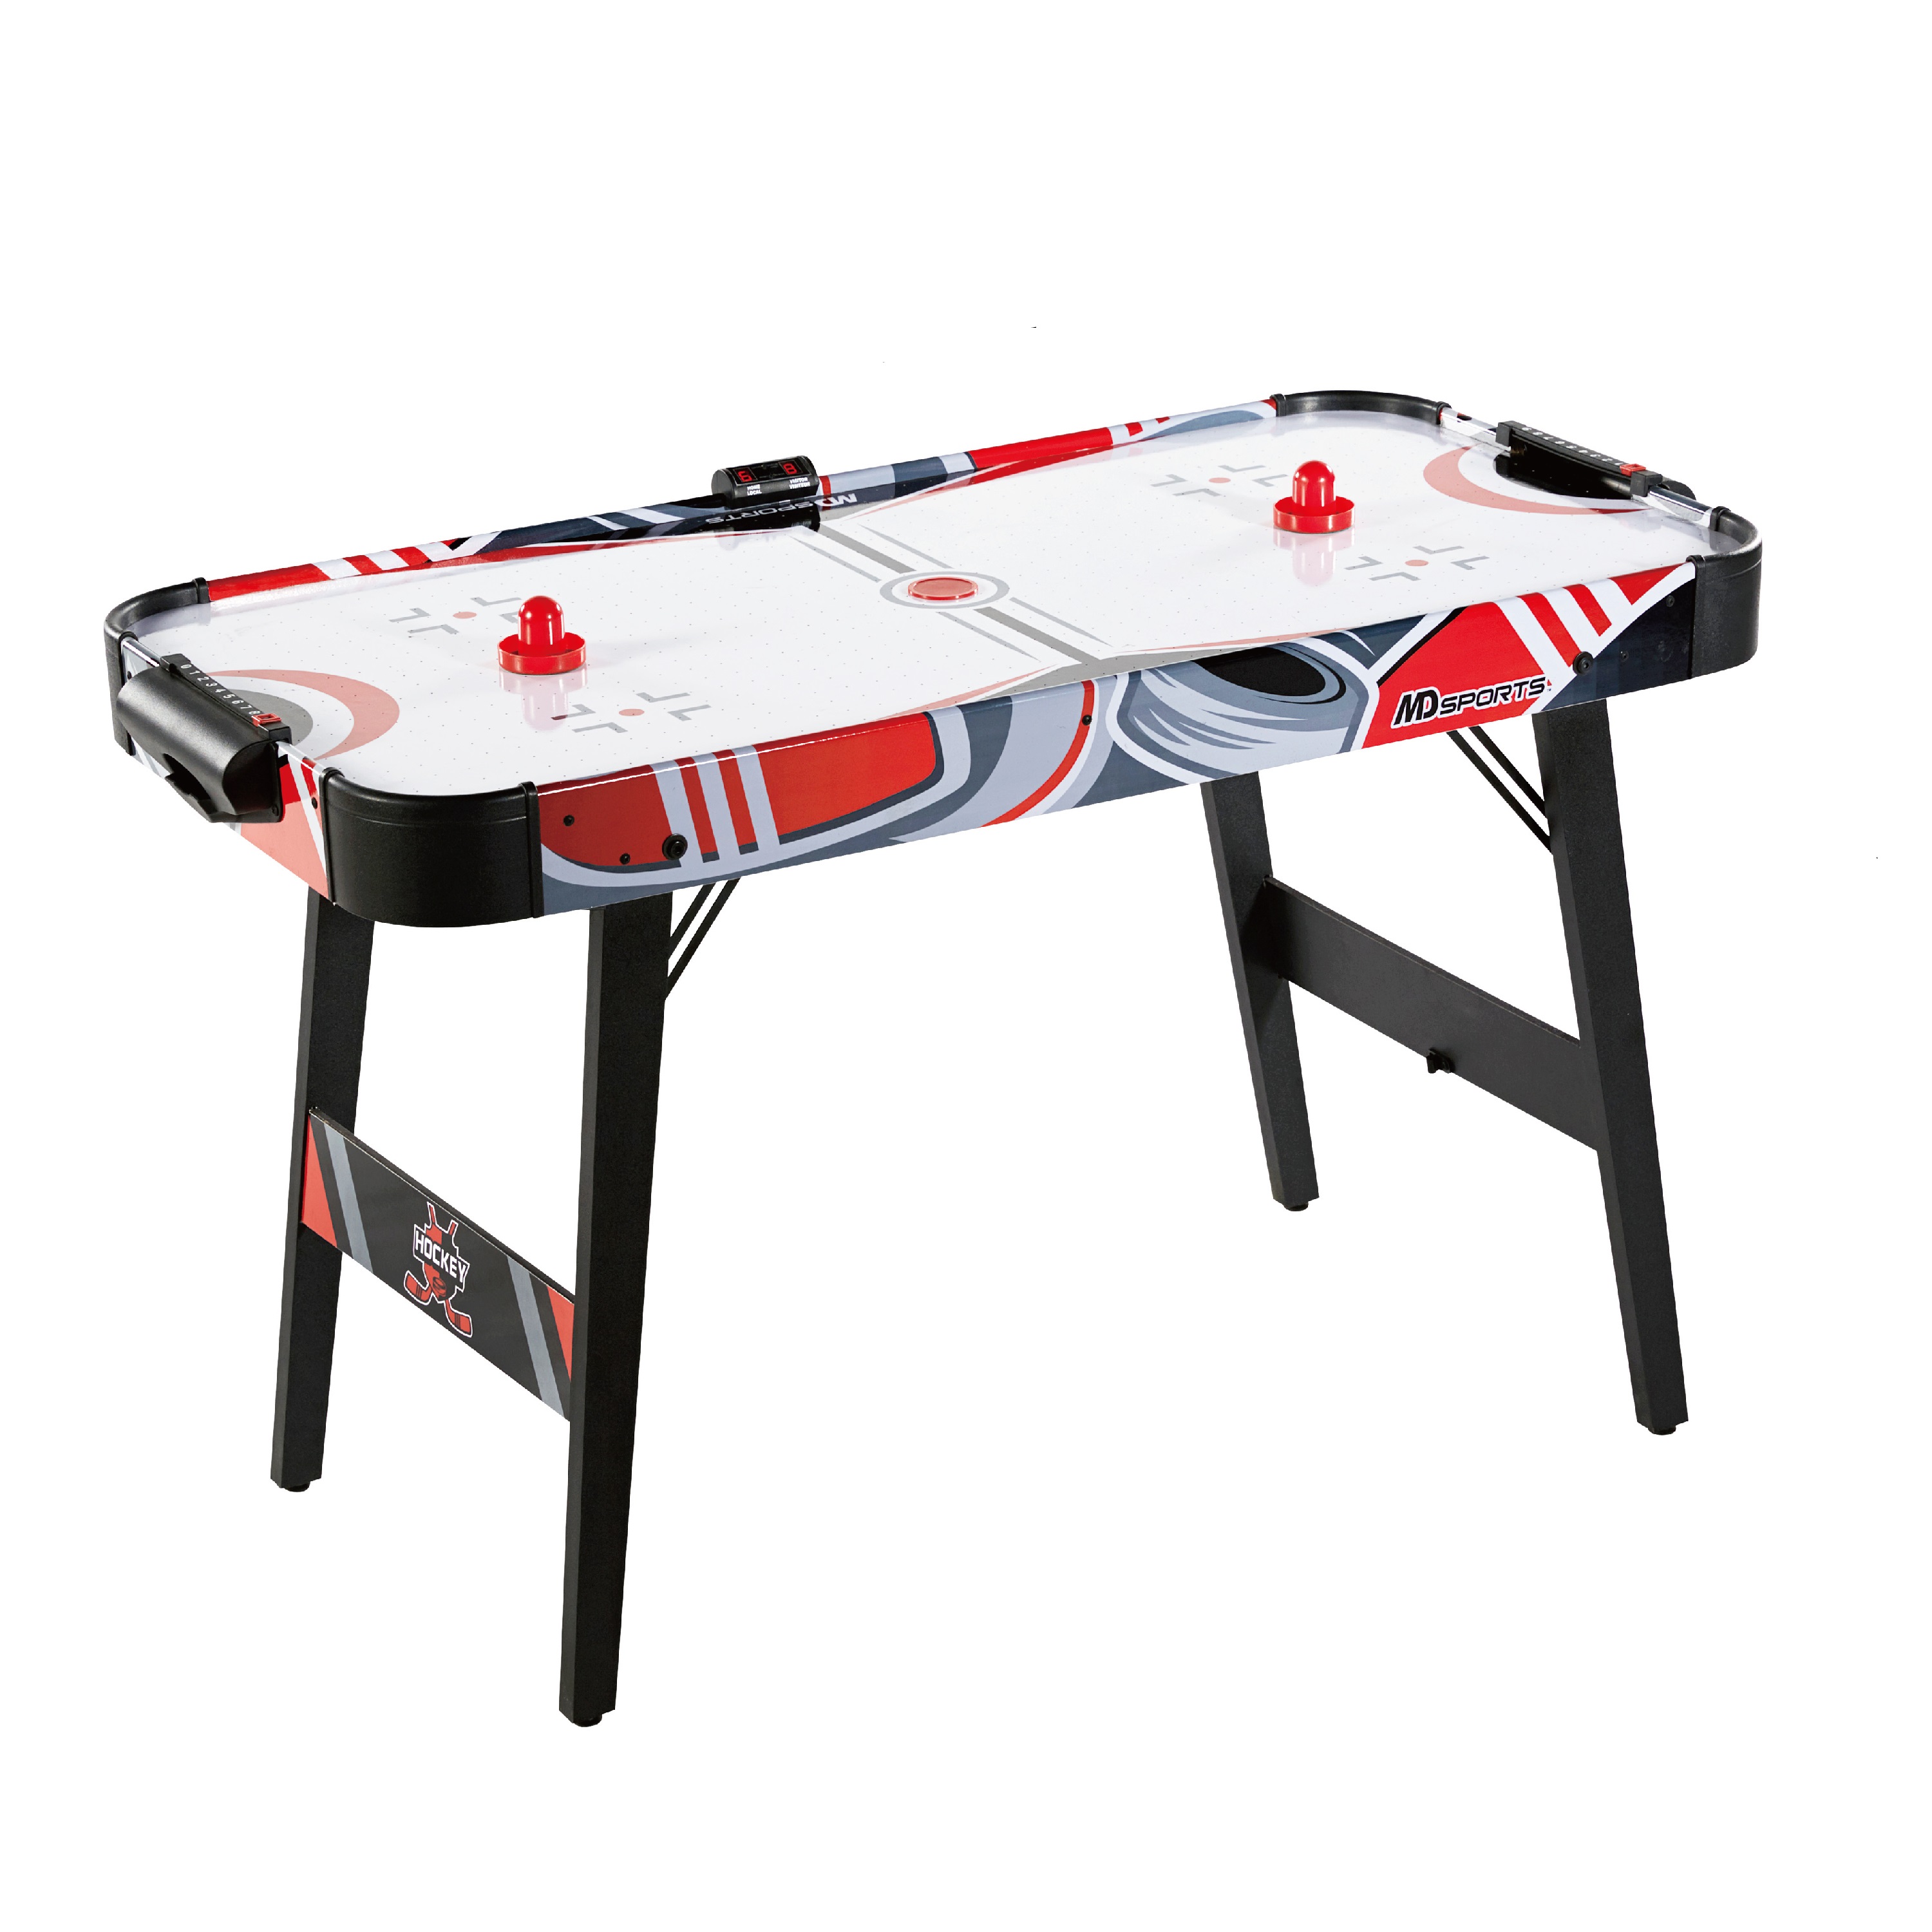 MD Sports Easy Assembly 48" Air Powered Hockey Table, Compact Storage/Foldable Legs, Red/Black - image 1 of 13